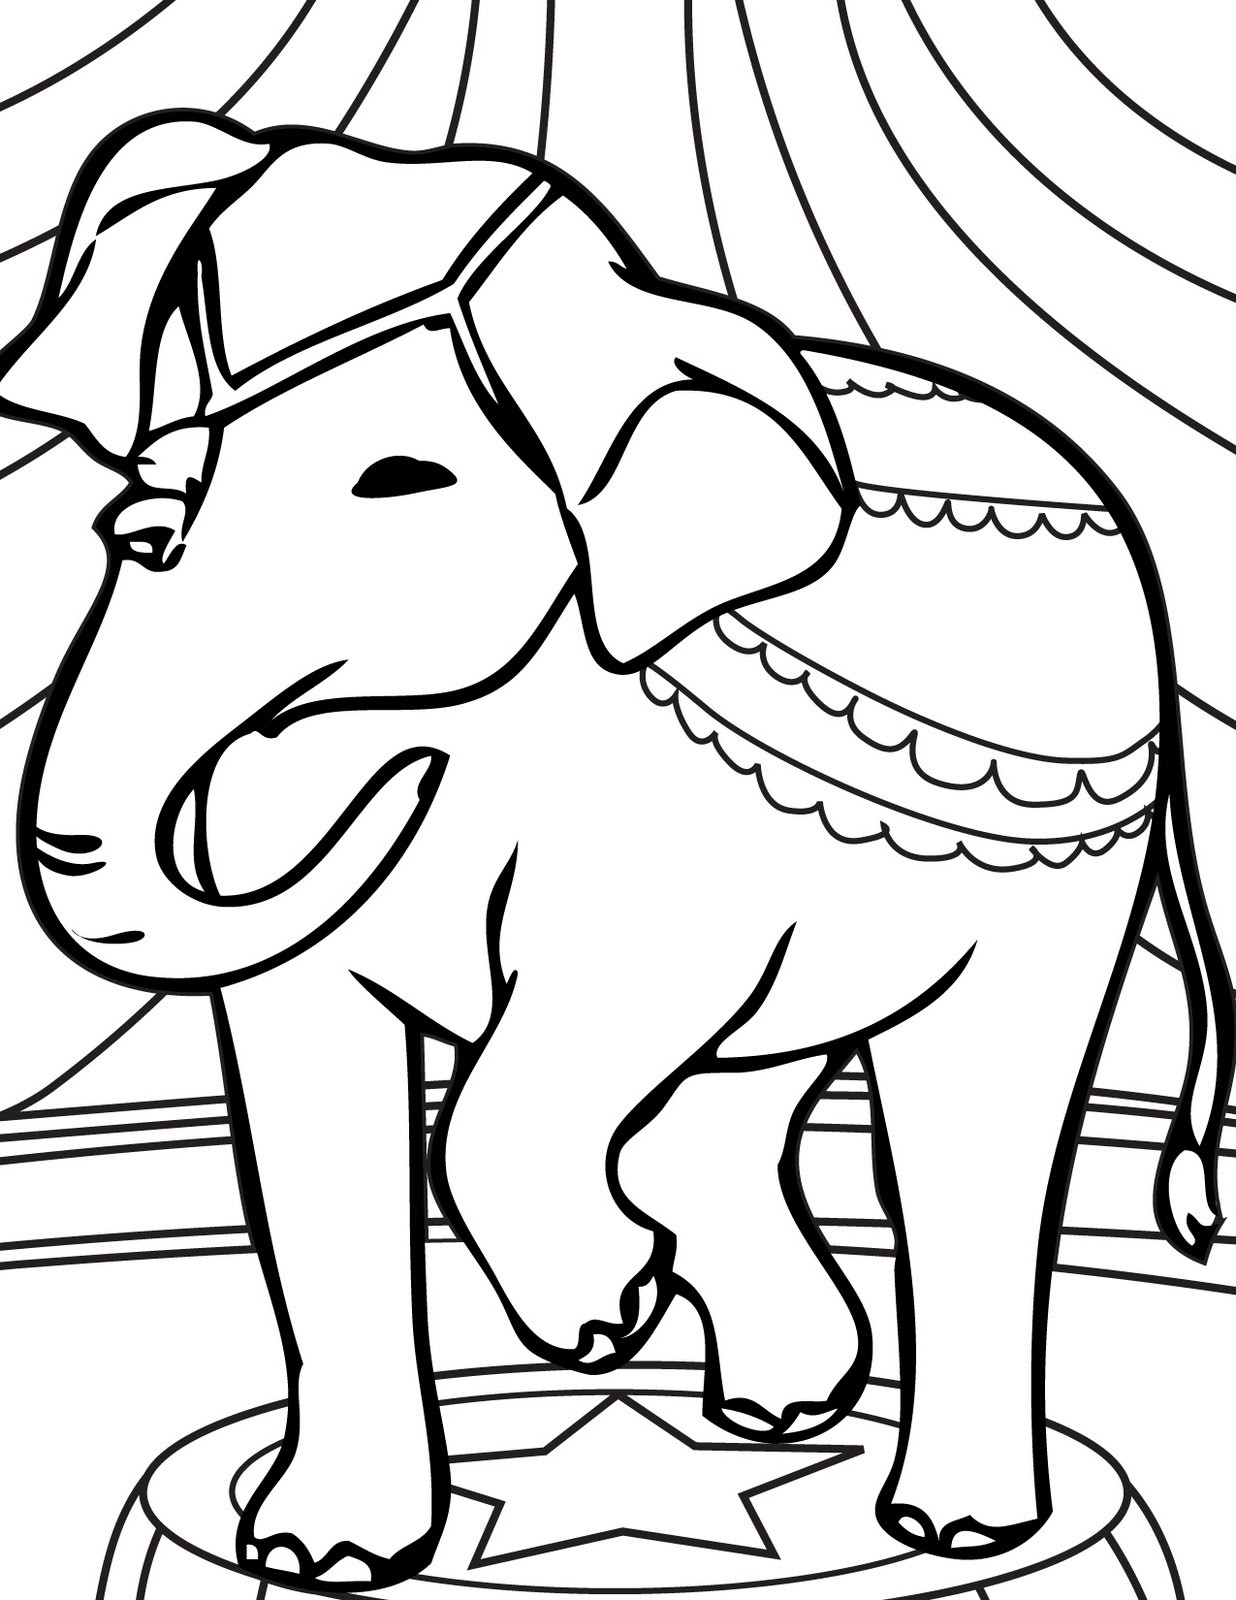 Coloring Printables For Kids
 transmissionpress Circus Elephant Coloring Pages